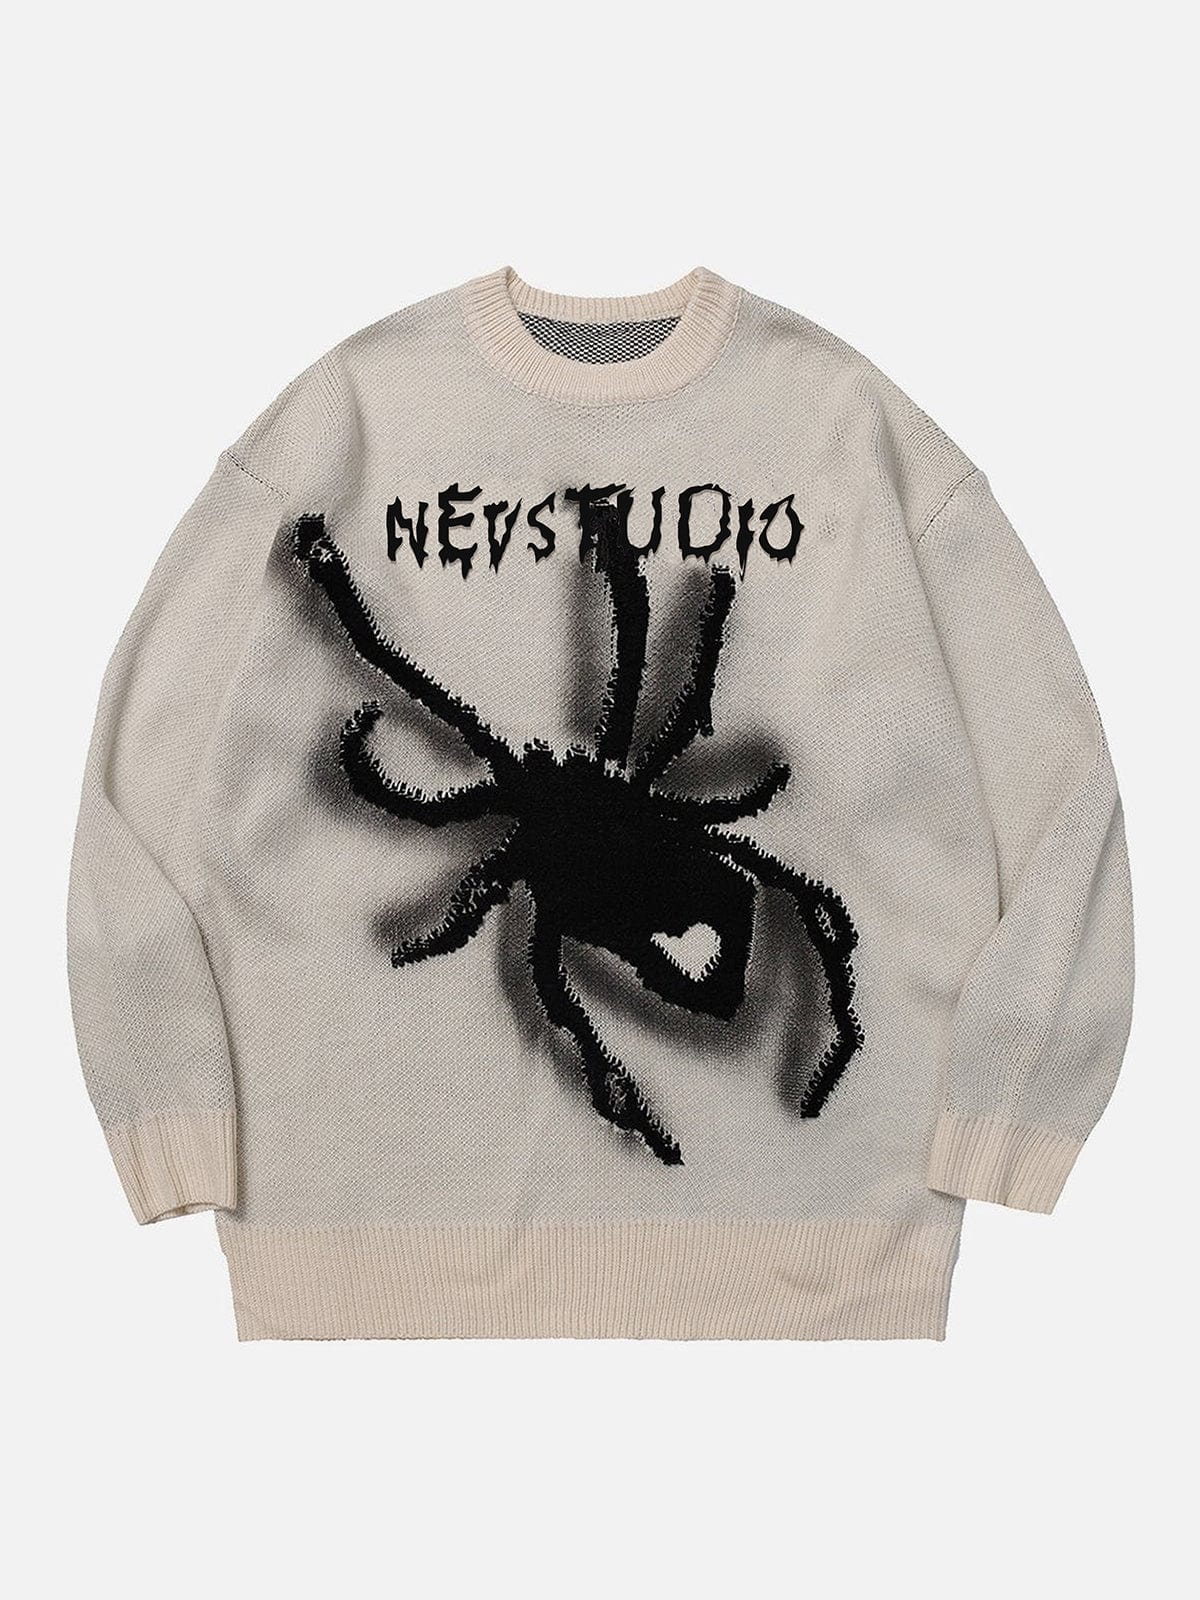 NEV Spider Jacquard Embroidery Sweater